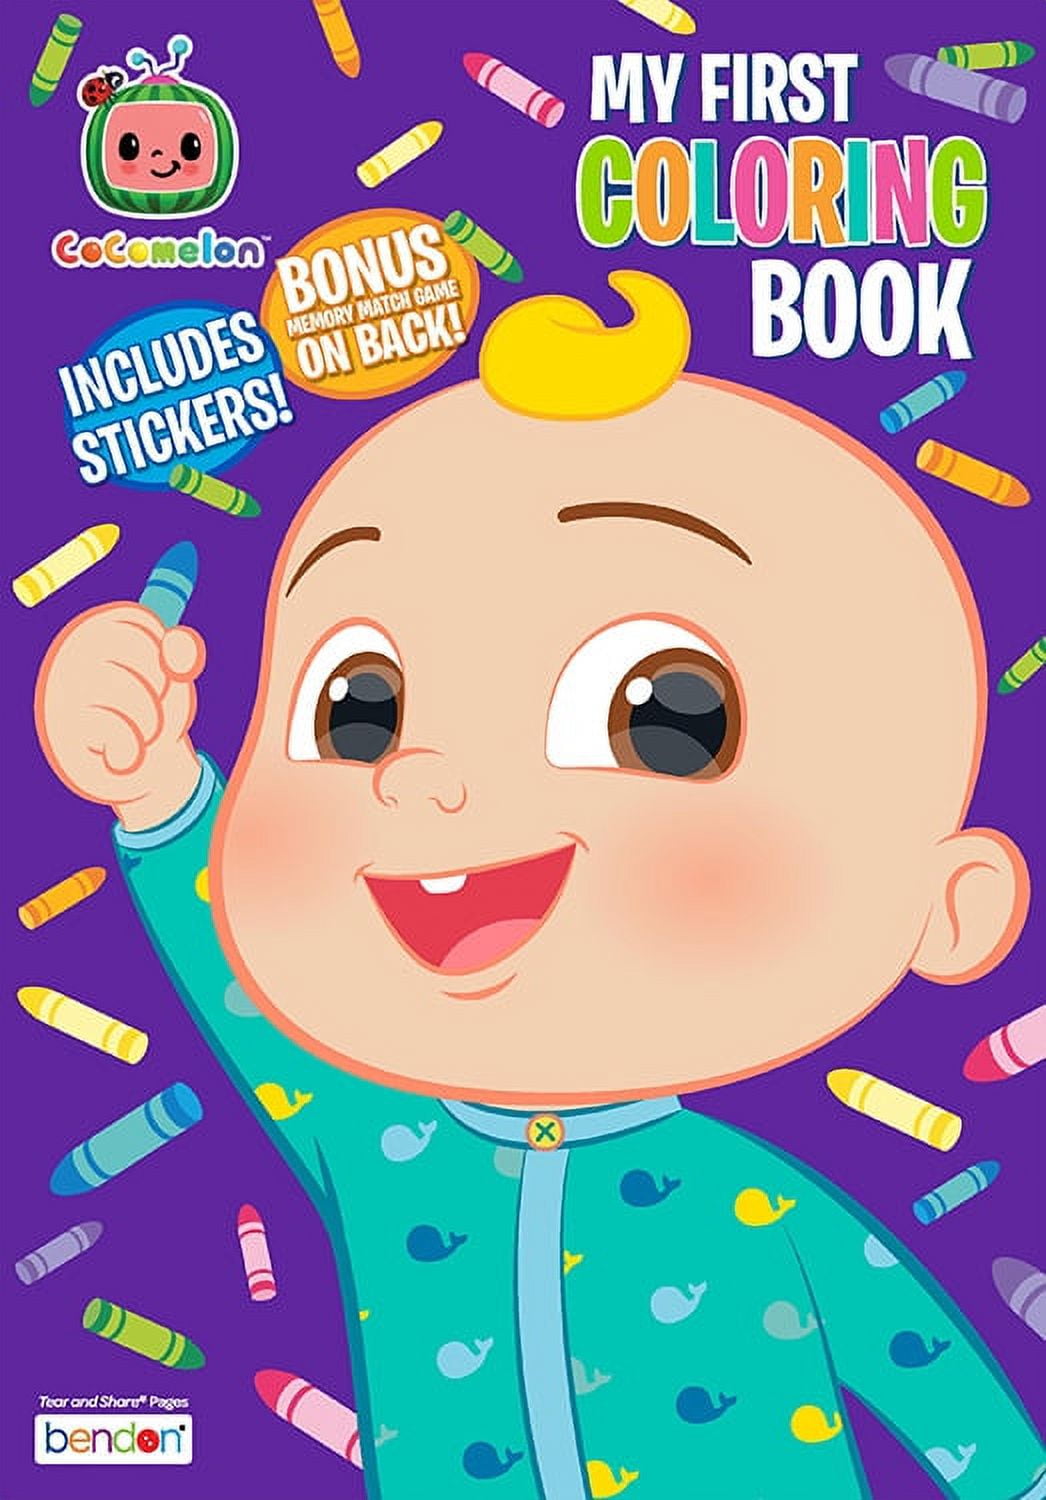 Cocomelon Coloring Book : Cocomelon Great Coloring book for kids, Quality  illustrations of Cocomelon for stress relieving and relaxation (Paperback)